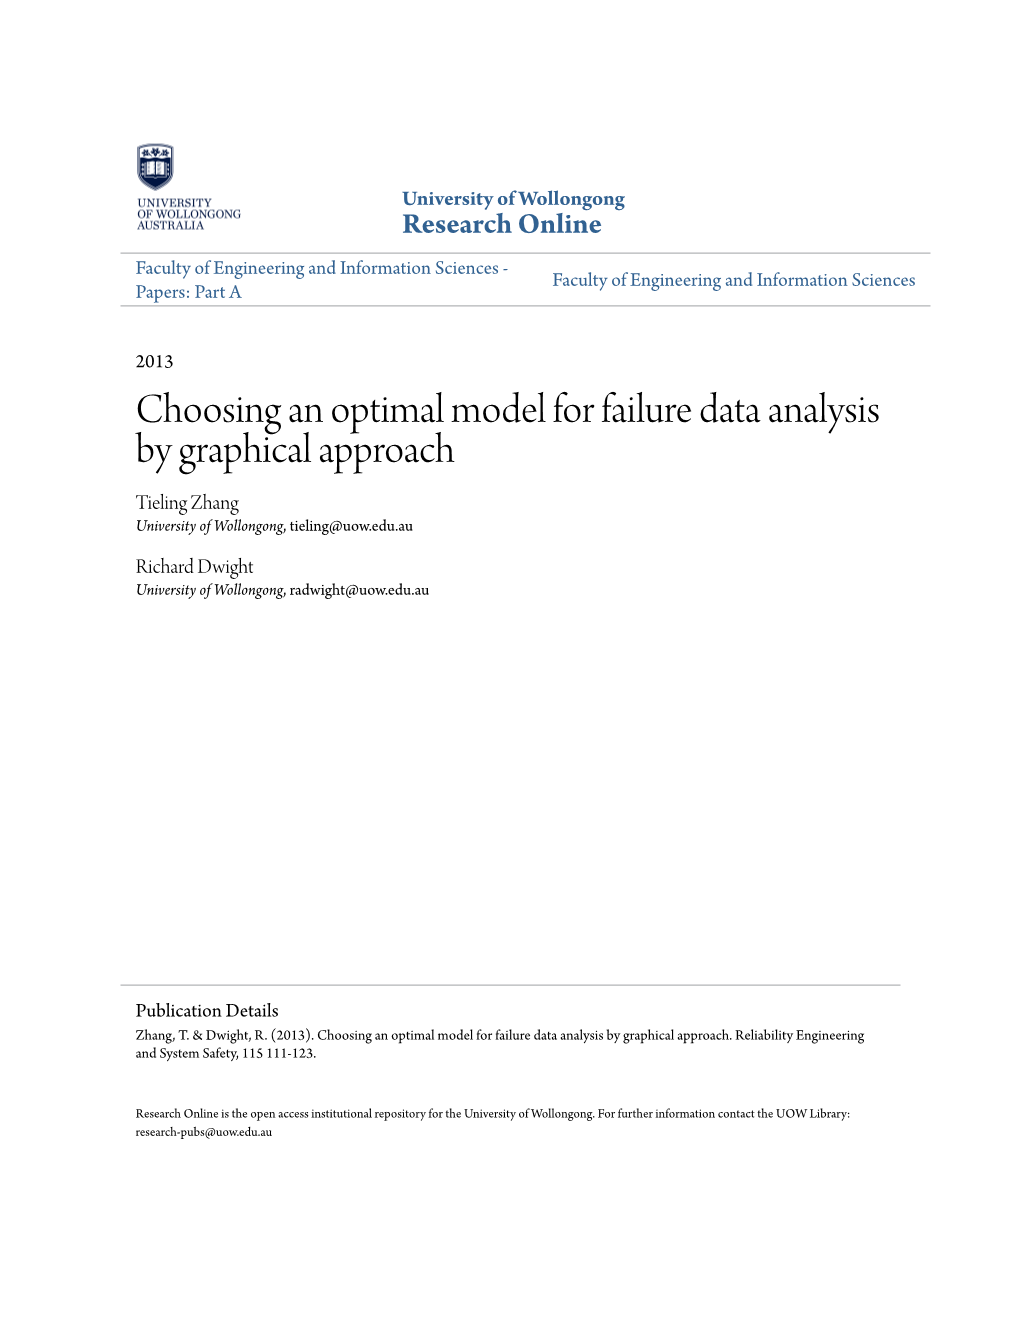 Choosing an Optimal Model for Failure Data Analysis by Graphical Approach Tieling Zhang University of Wollongong, Tieling@Uow.Edu.Au